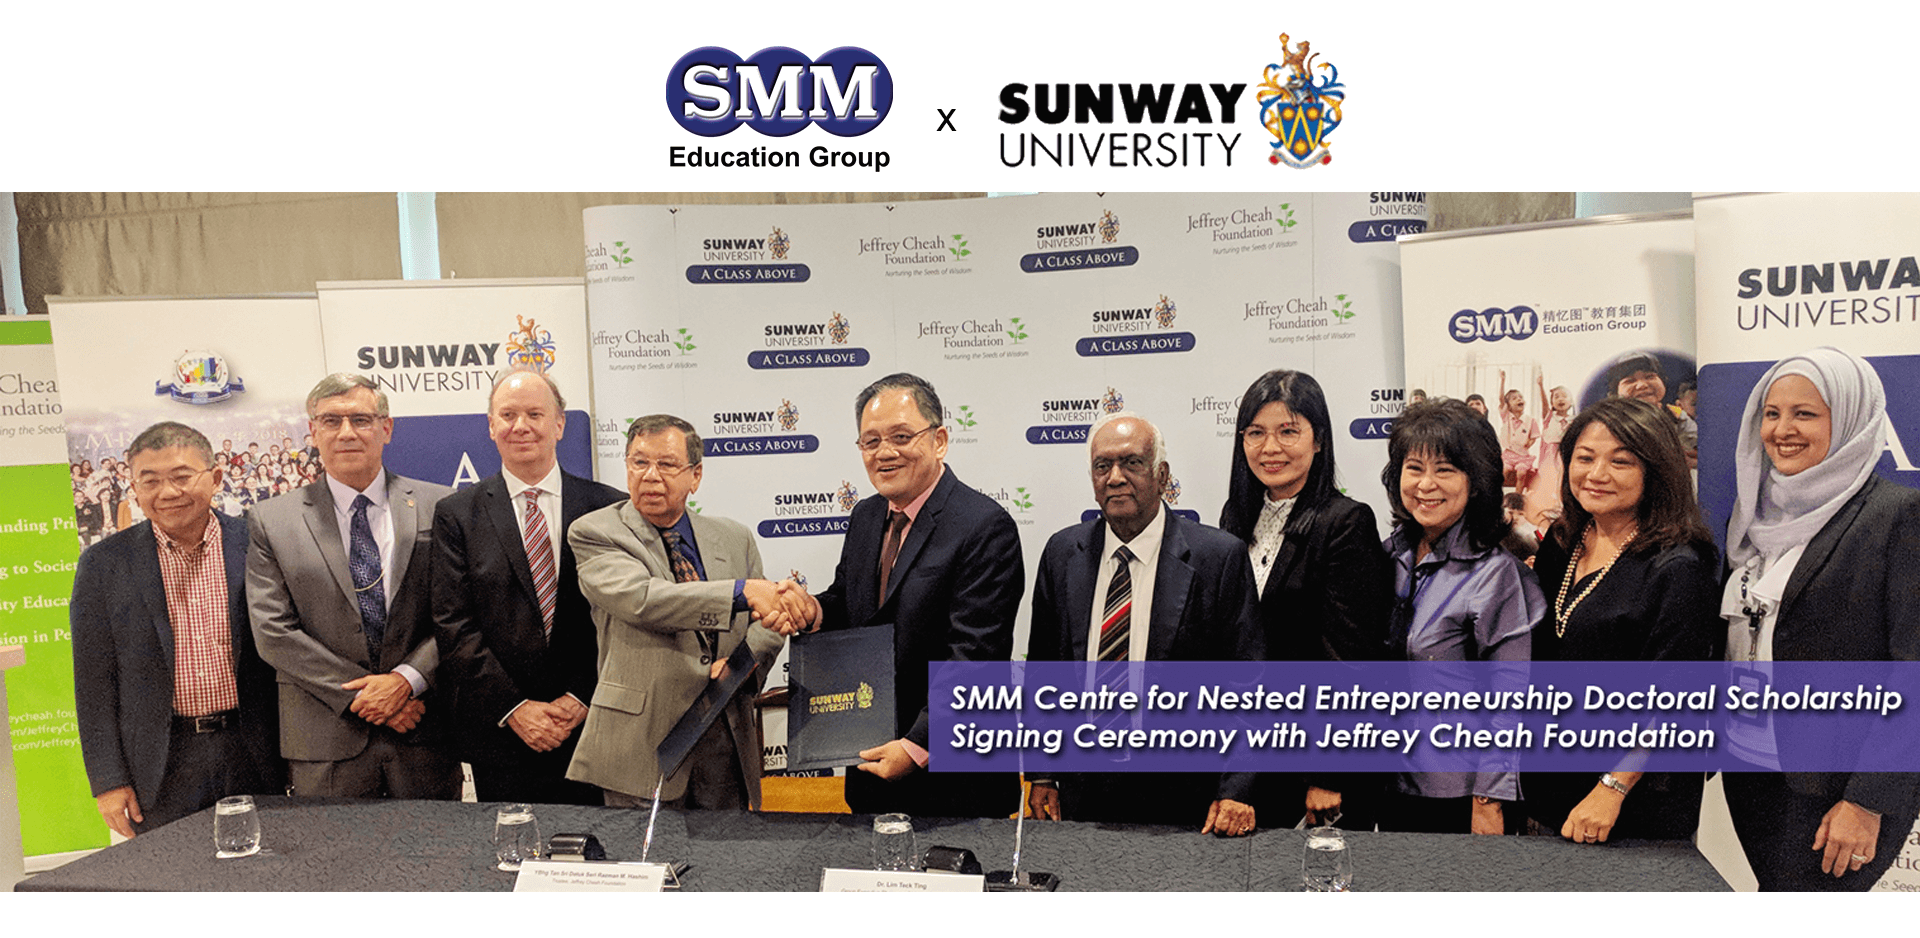 SMMCNE Doctoral Scholarship signing ceremony with Jeffrey Cheah Foundation